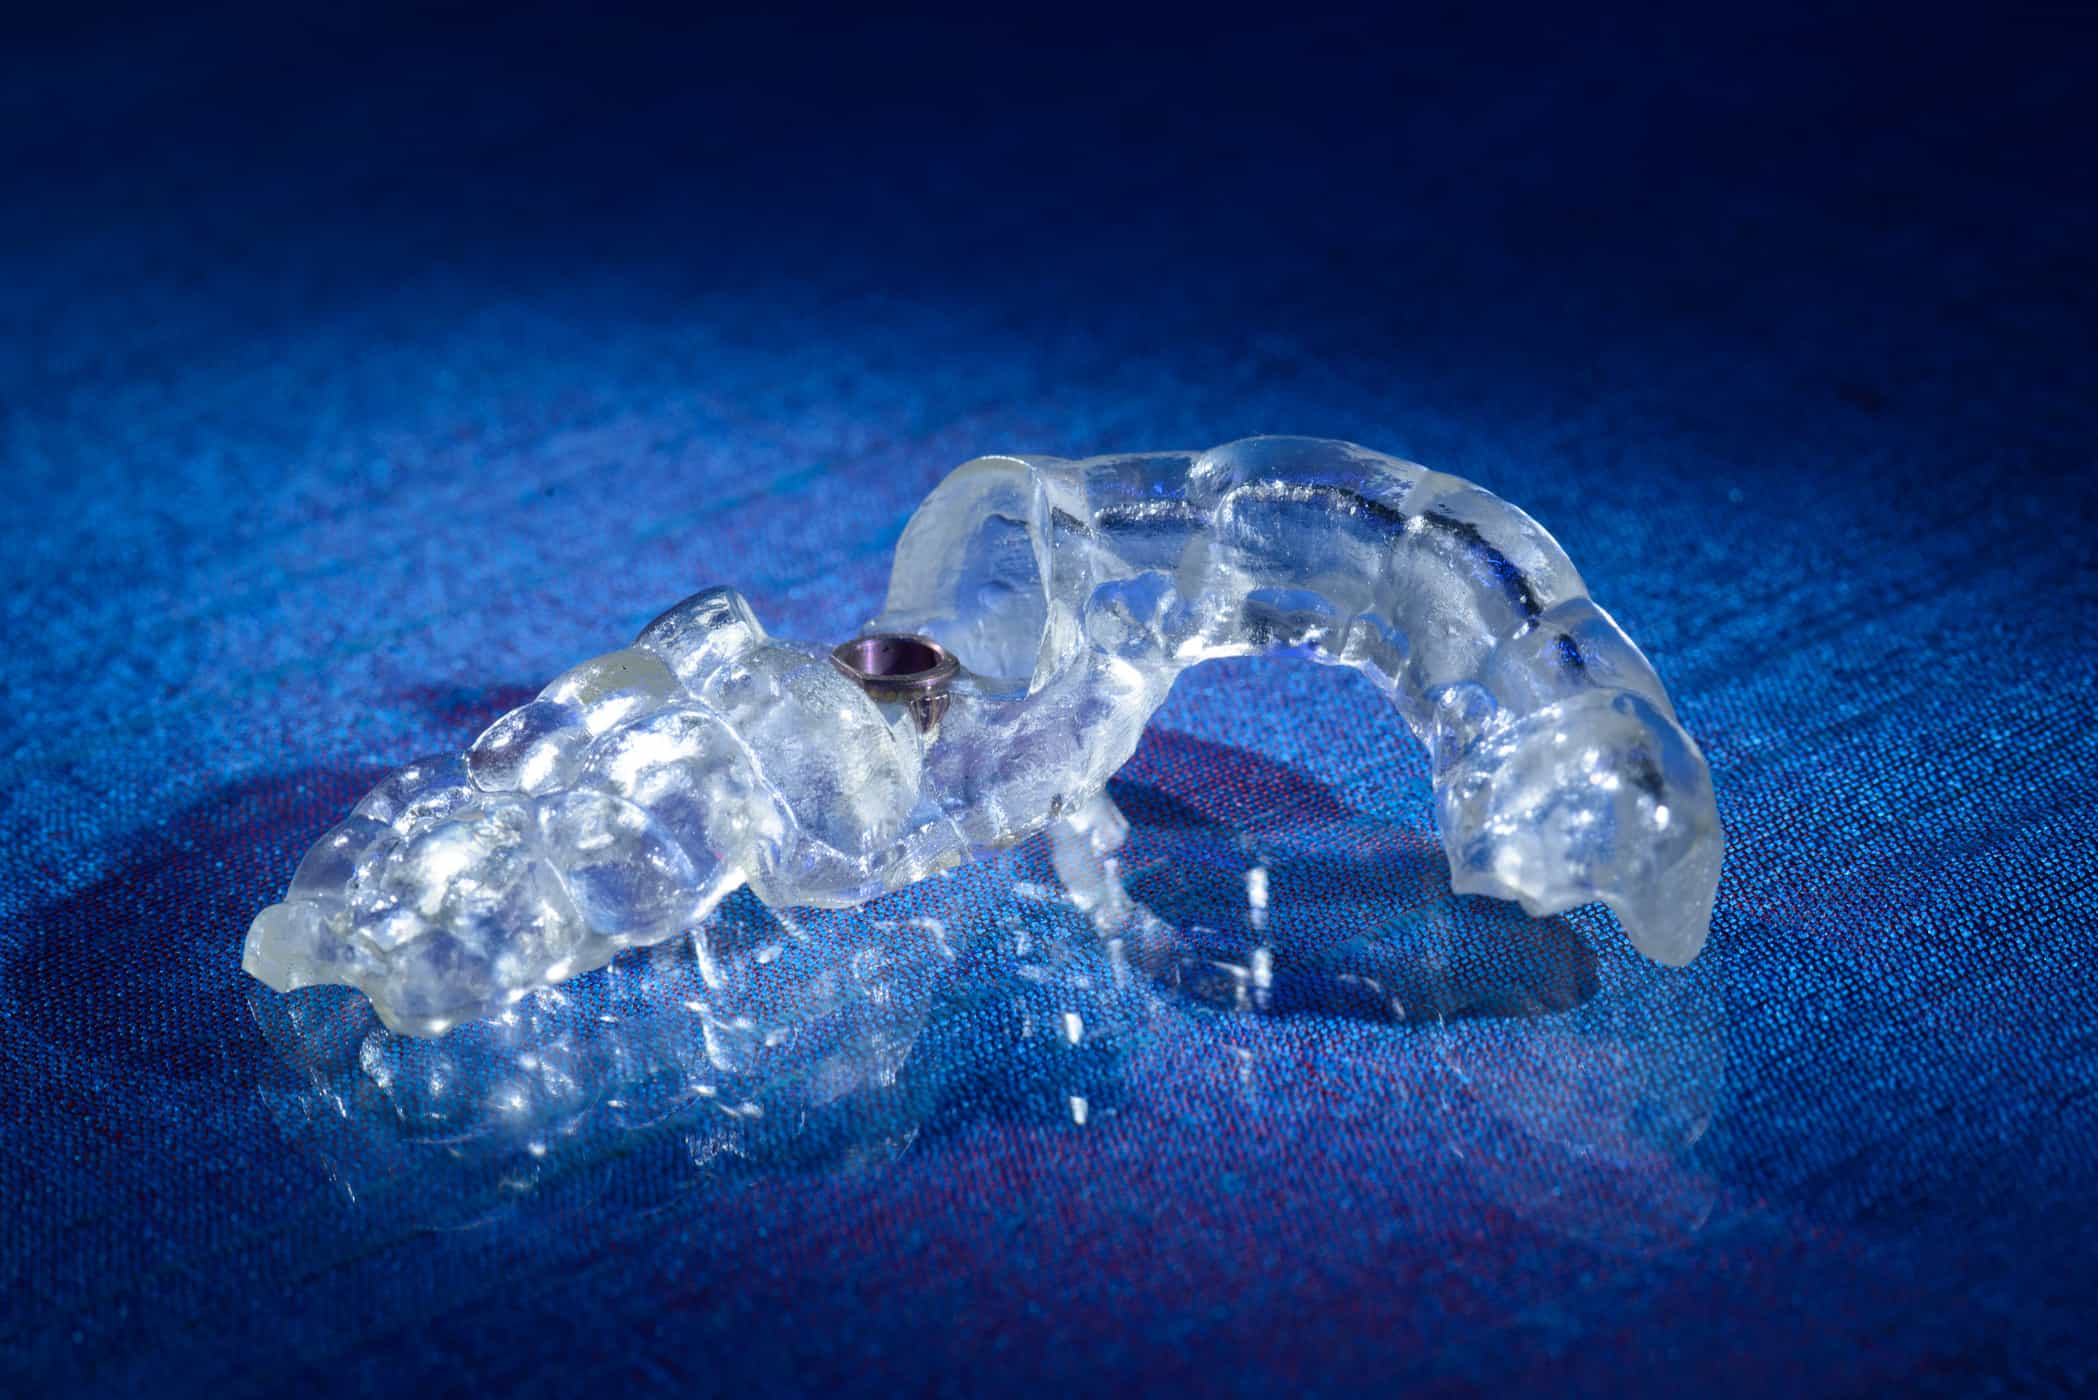 Guided Surgery Appliance created by Burbank Dental Lab